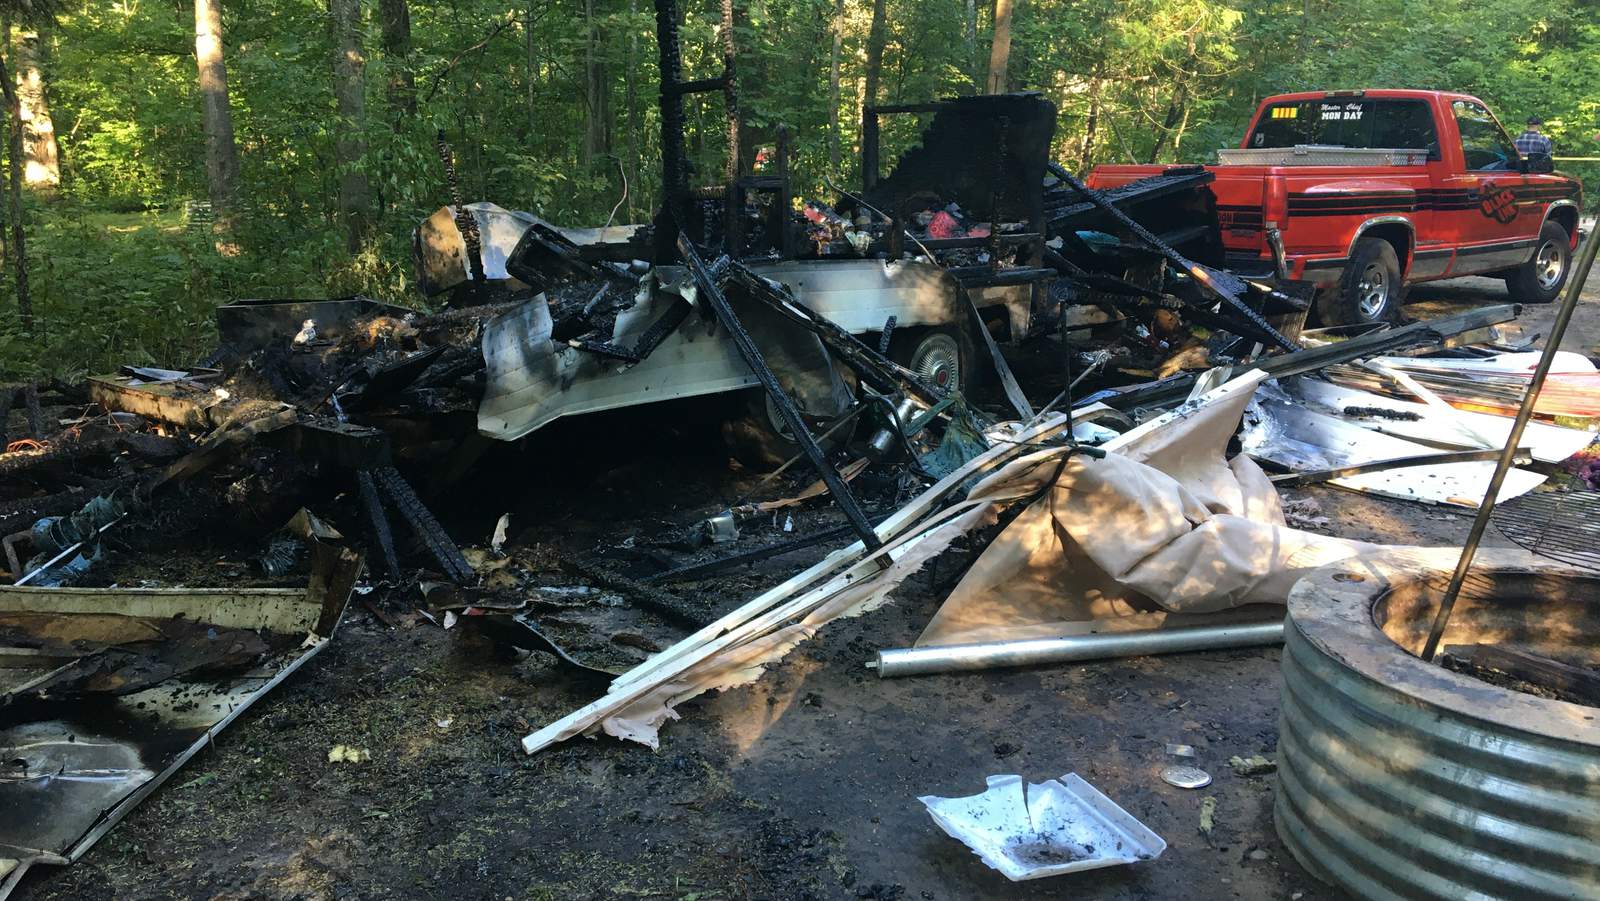 Beulah man burned while helping wife, dog escape camper explosion in Benzie County